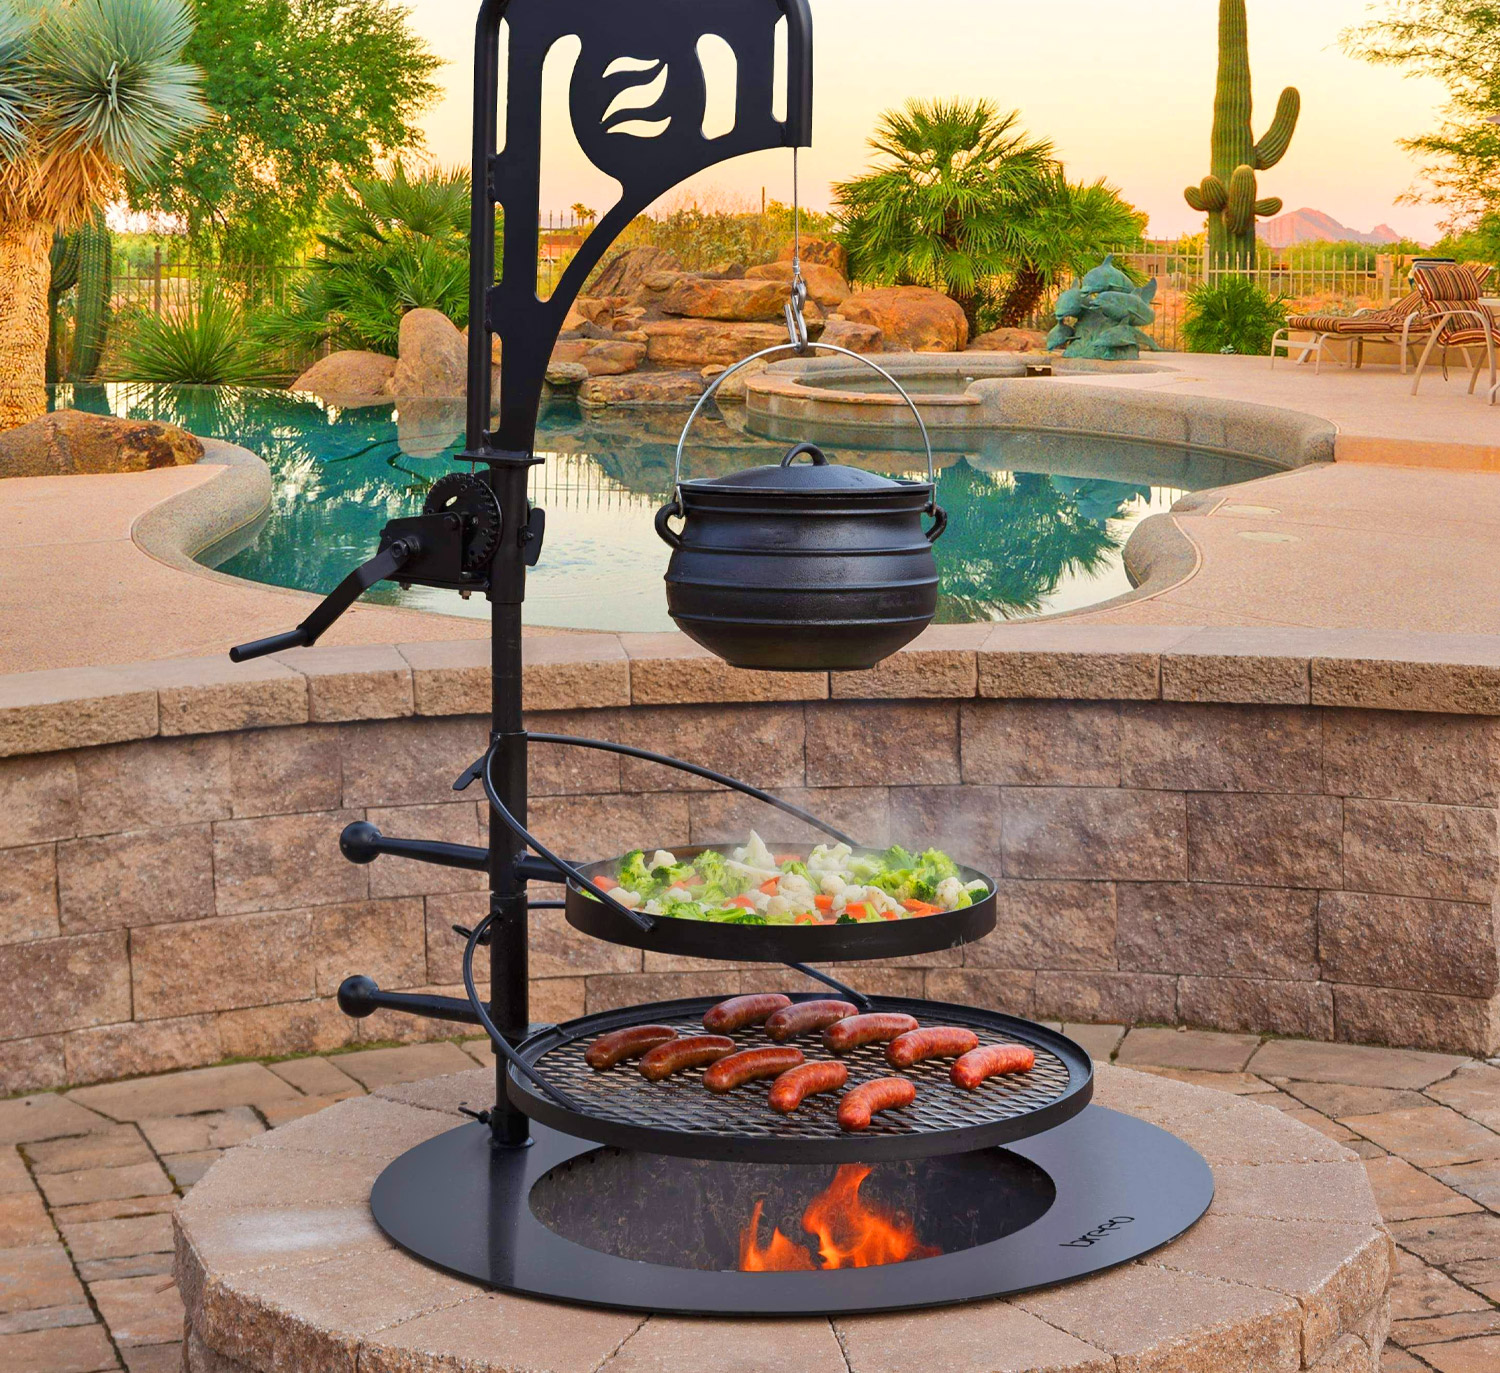 Fire Pit Into A Tiered Cooking Machine, Grill Rack For Fire Pit